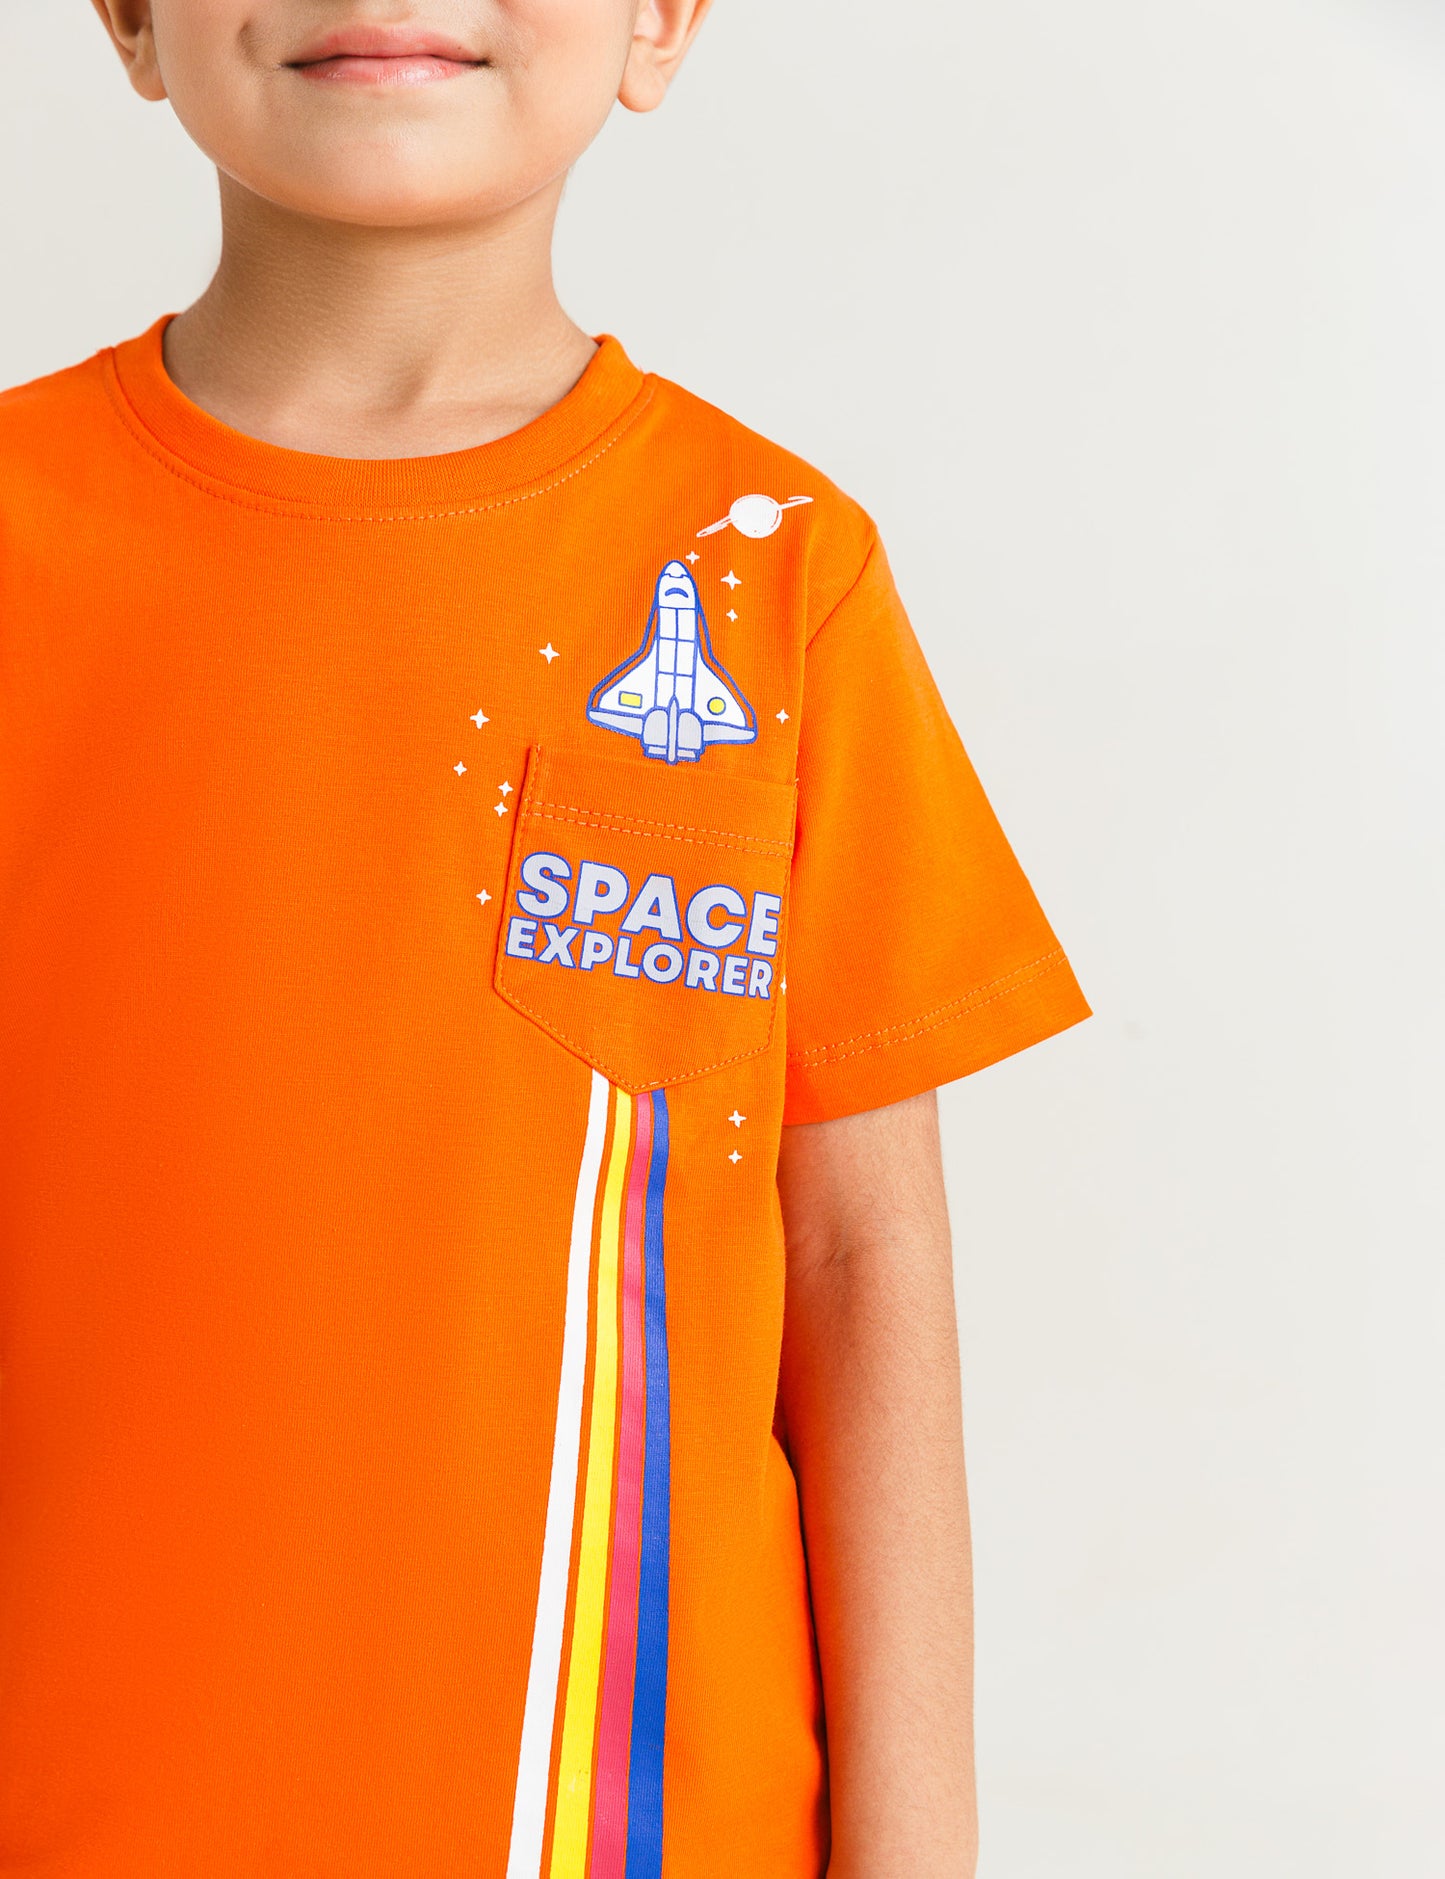 SPACE EXPOLRER GRAPHIC T-SHIRT